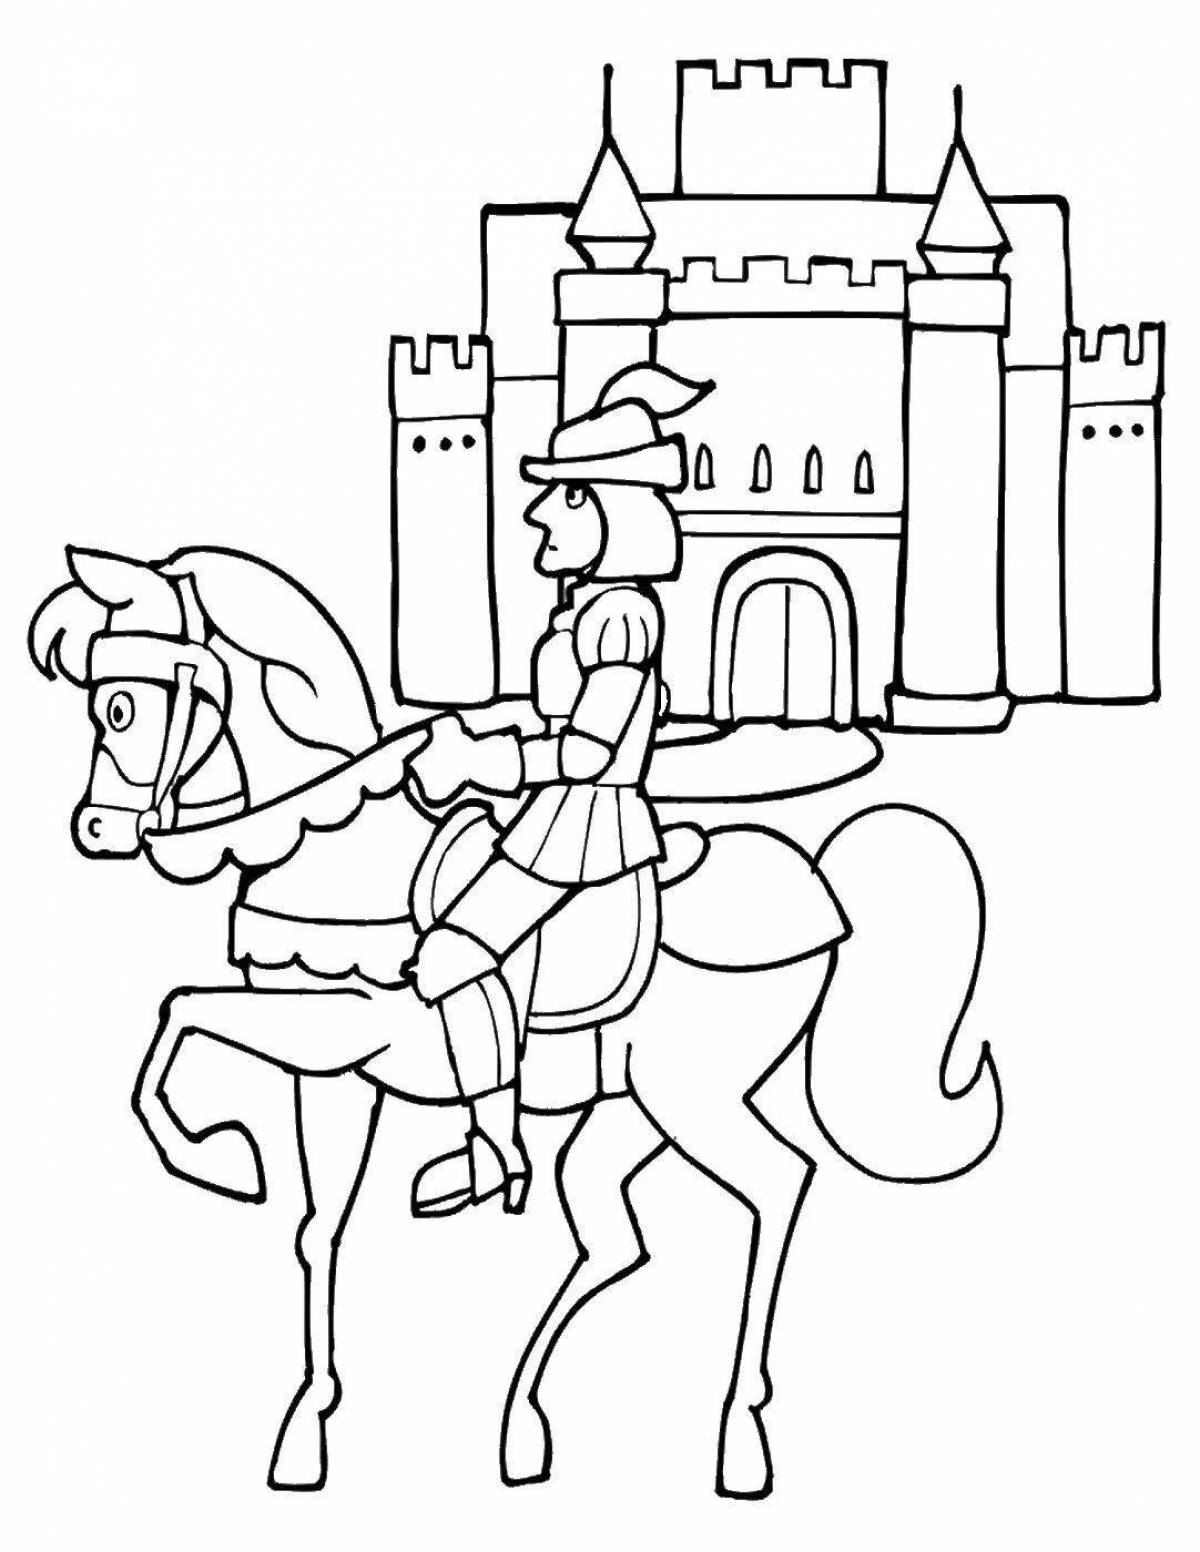 Charming knight's castle coloring page